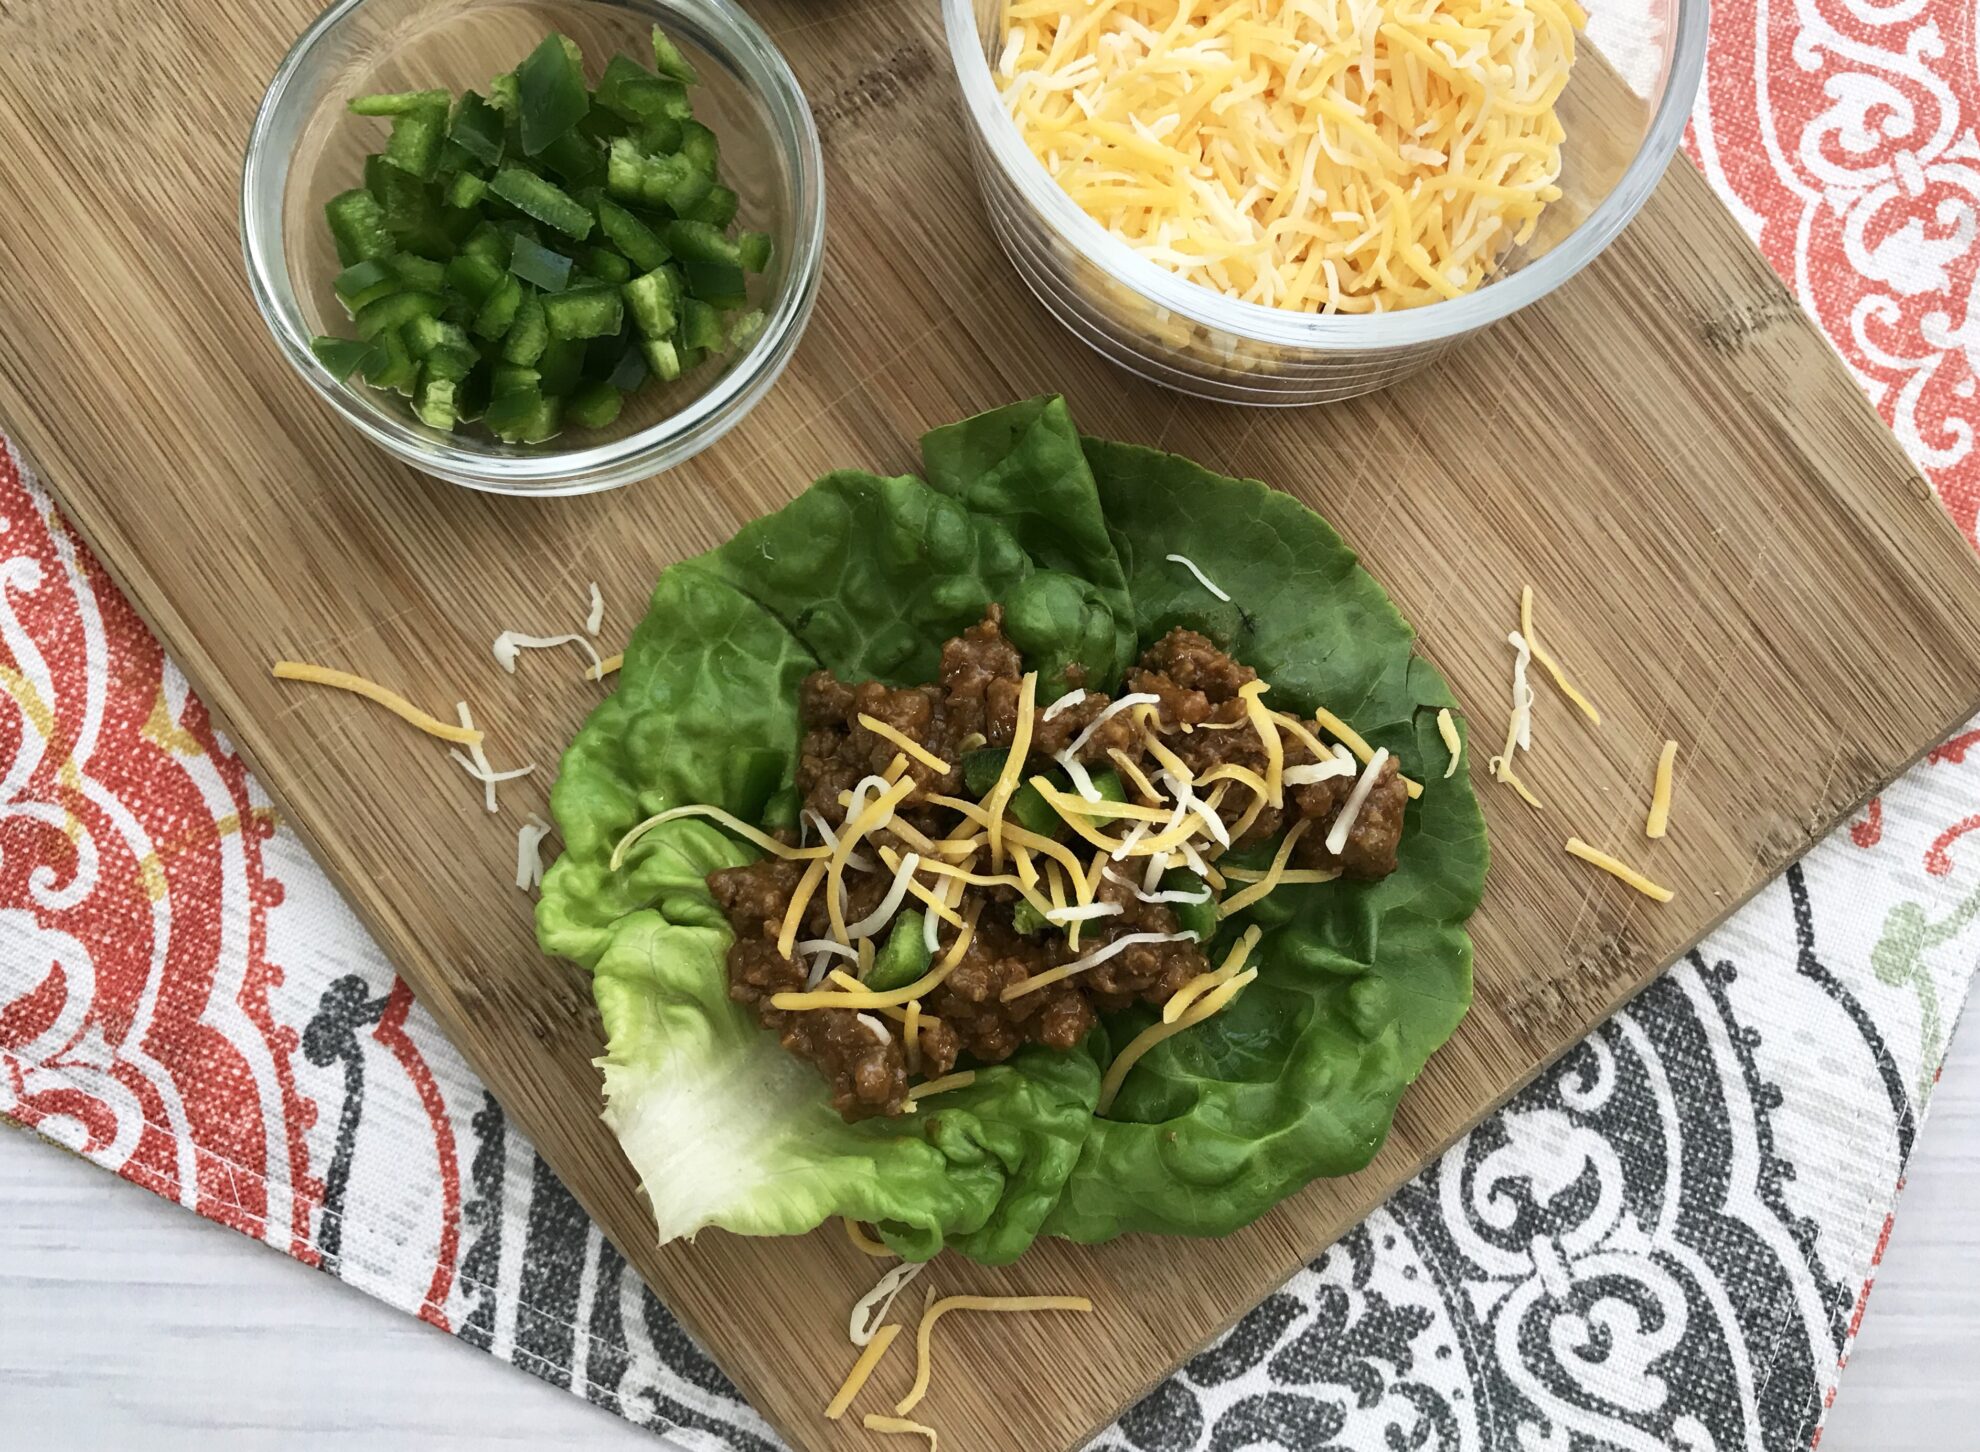 Need a quick, easy, and healthy meal option without the carbs? These Keto Sloppy Joes are just the thing! Find the recipe on 5 Dollar Dinners!